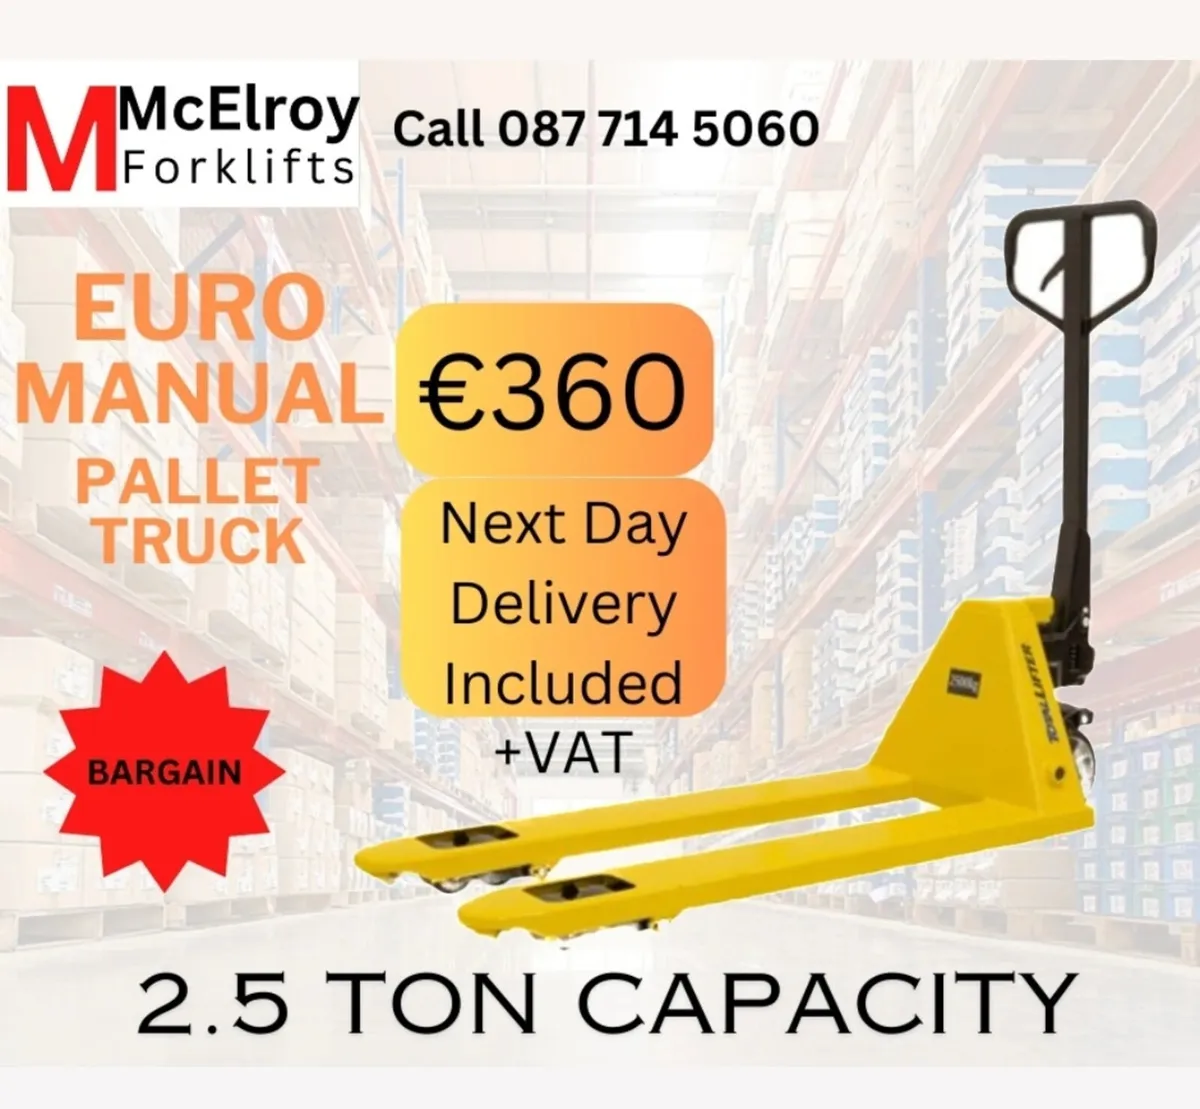 Manual Hand Pallet Truck €360 - Image 1